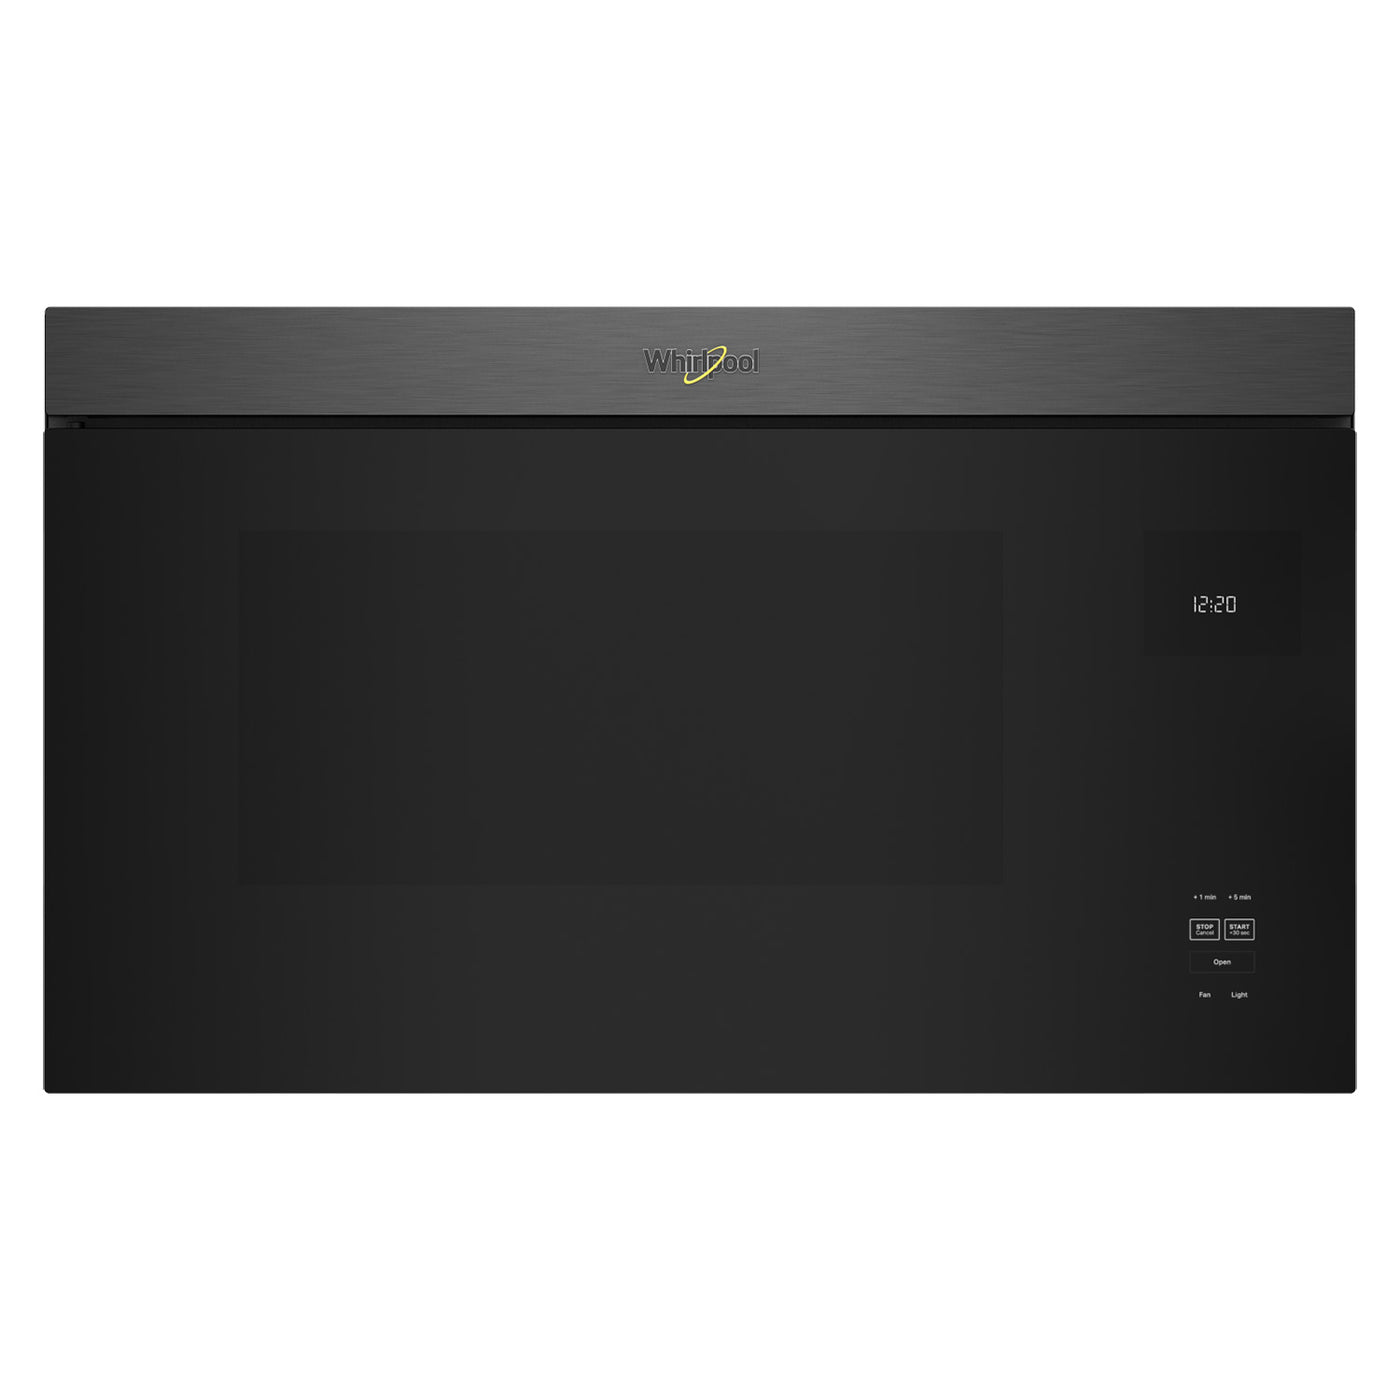 Whirlpool Black Stainless Over-the-Range Microwave (1.10 Cu Ft) - YWMMF5930PV